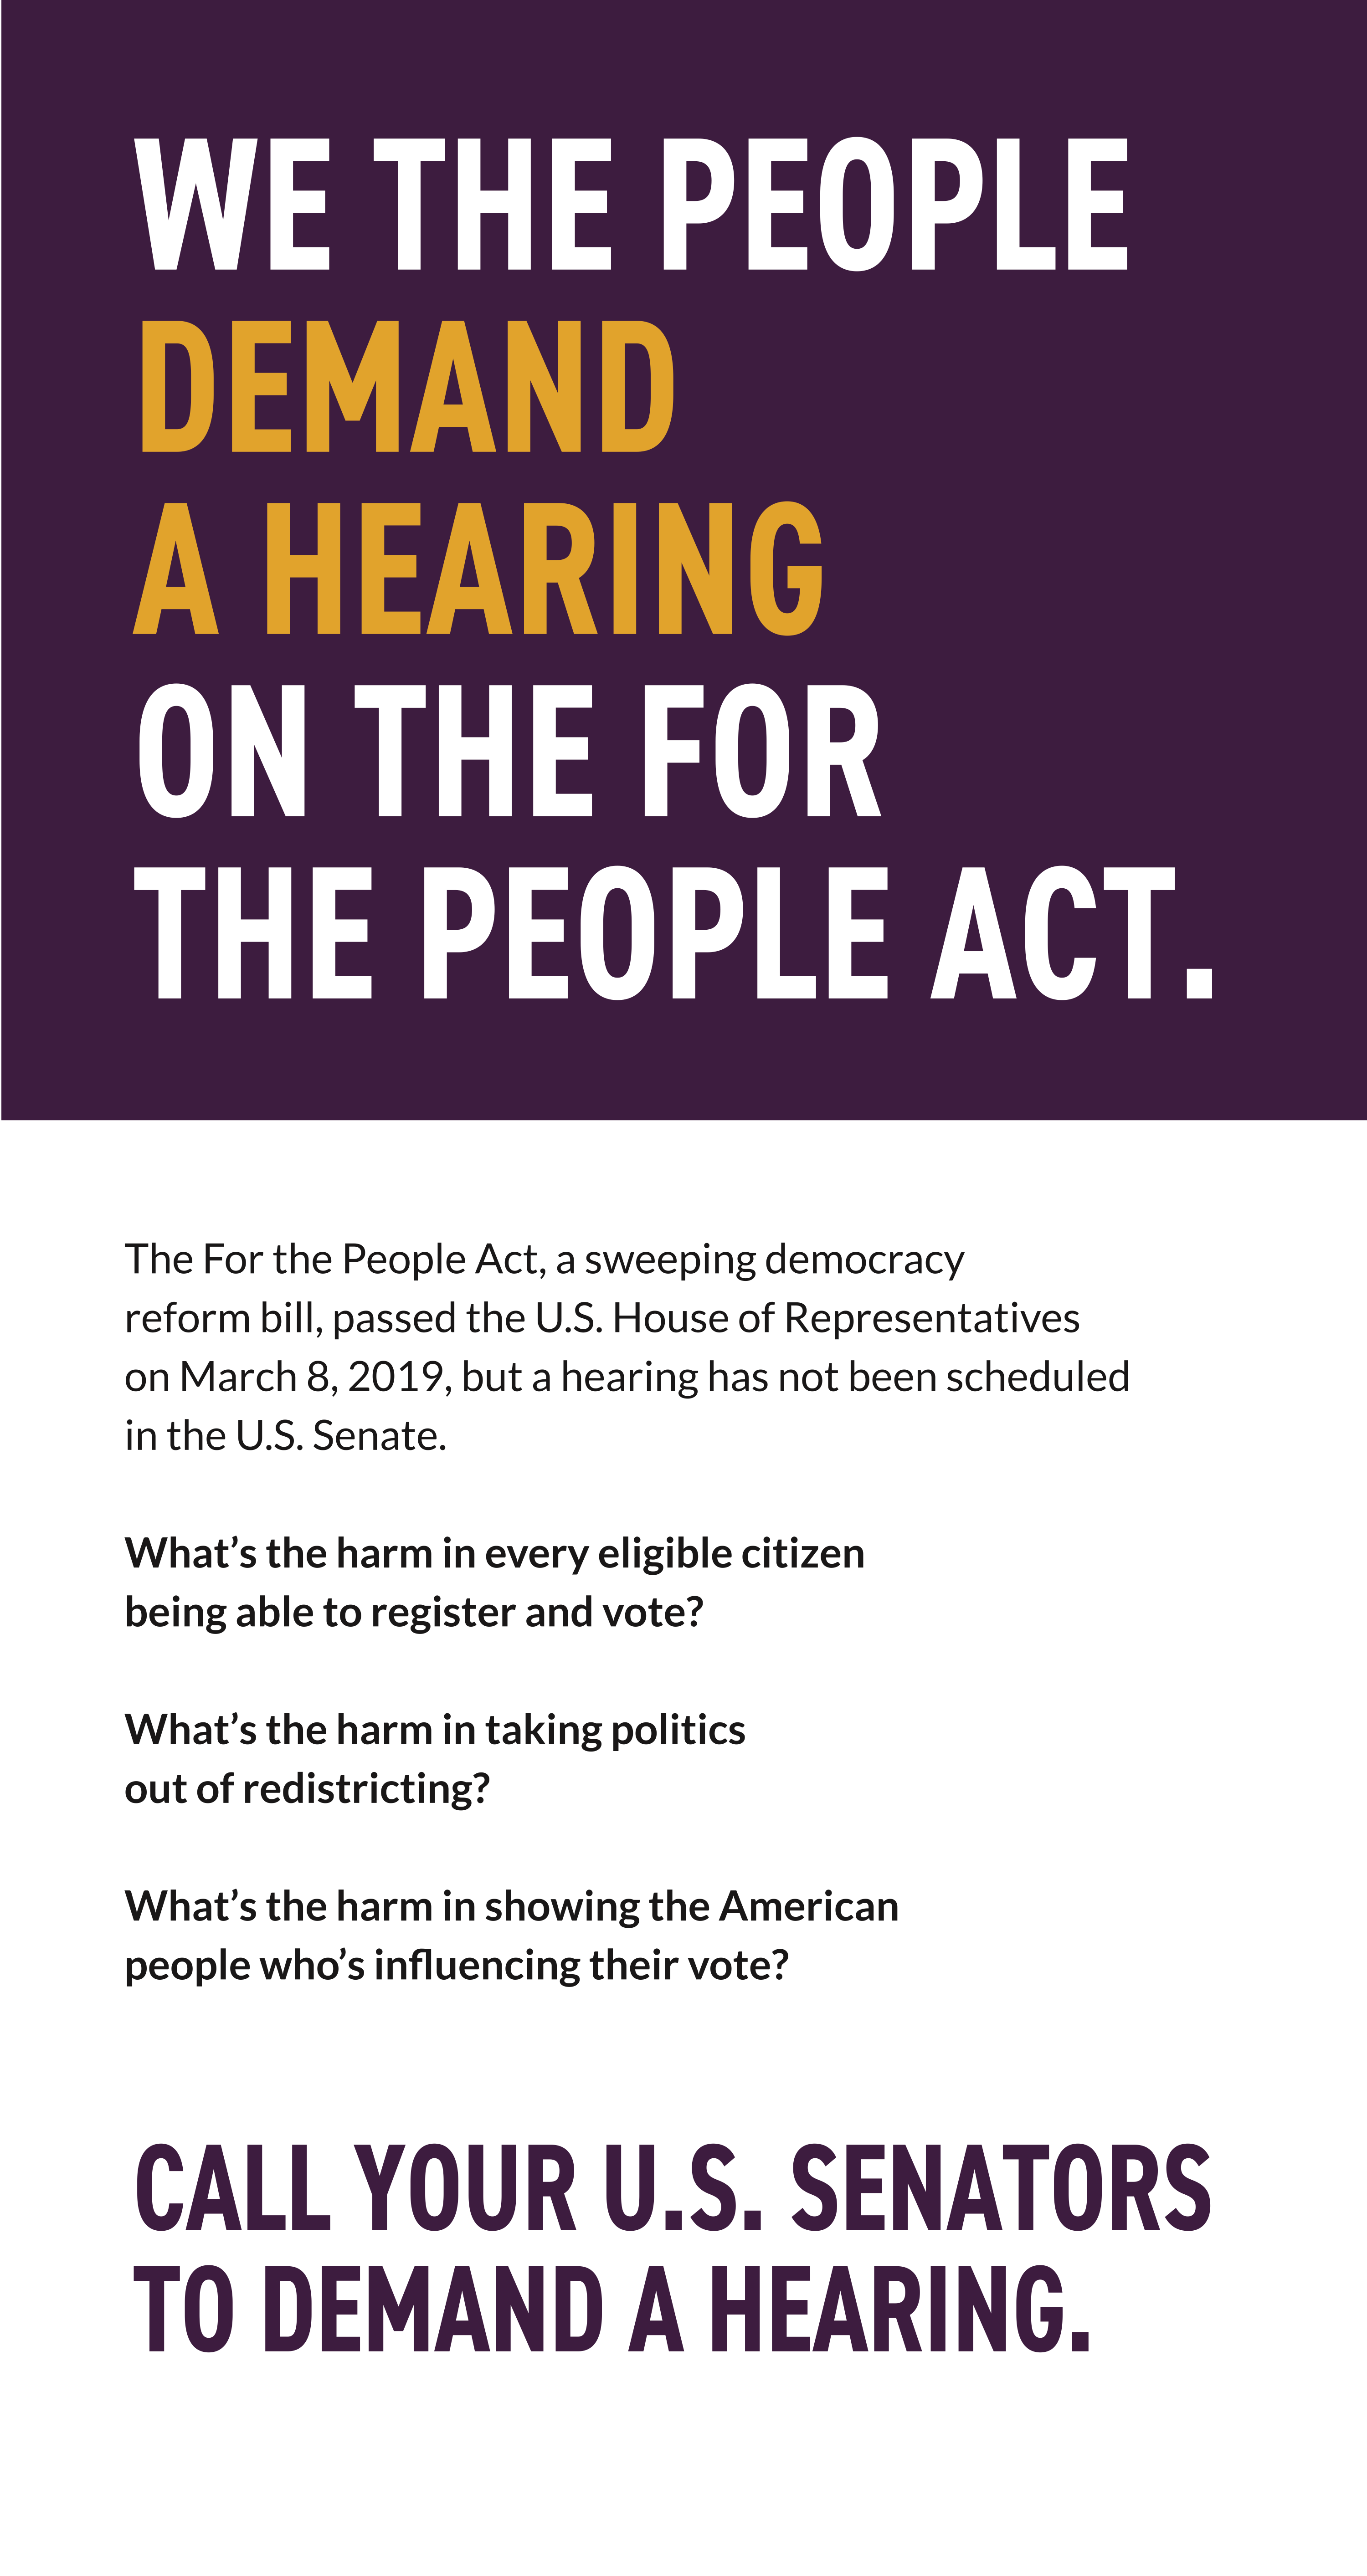 We the people demand a hearing on the for the people act